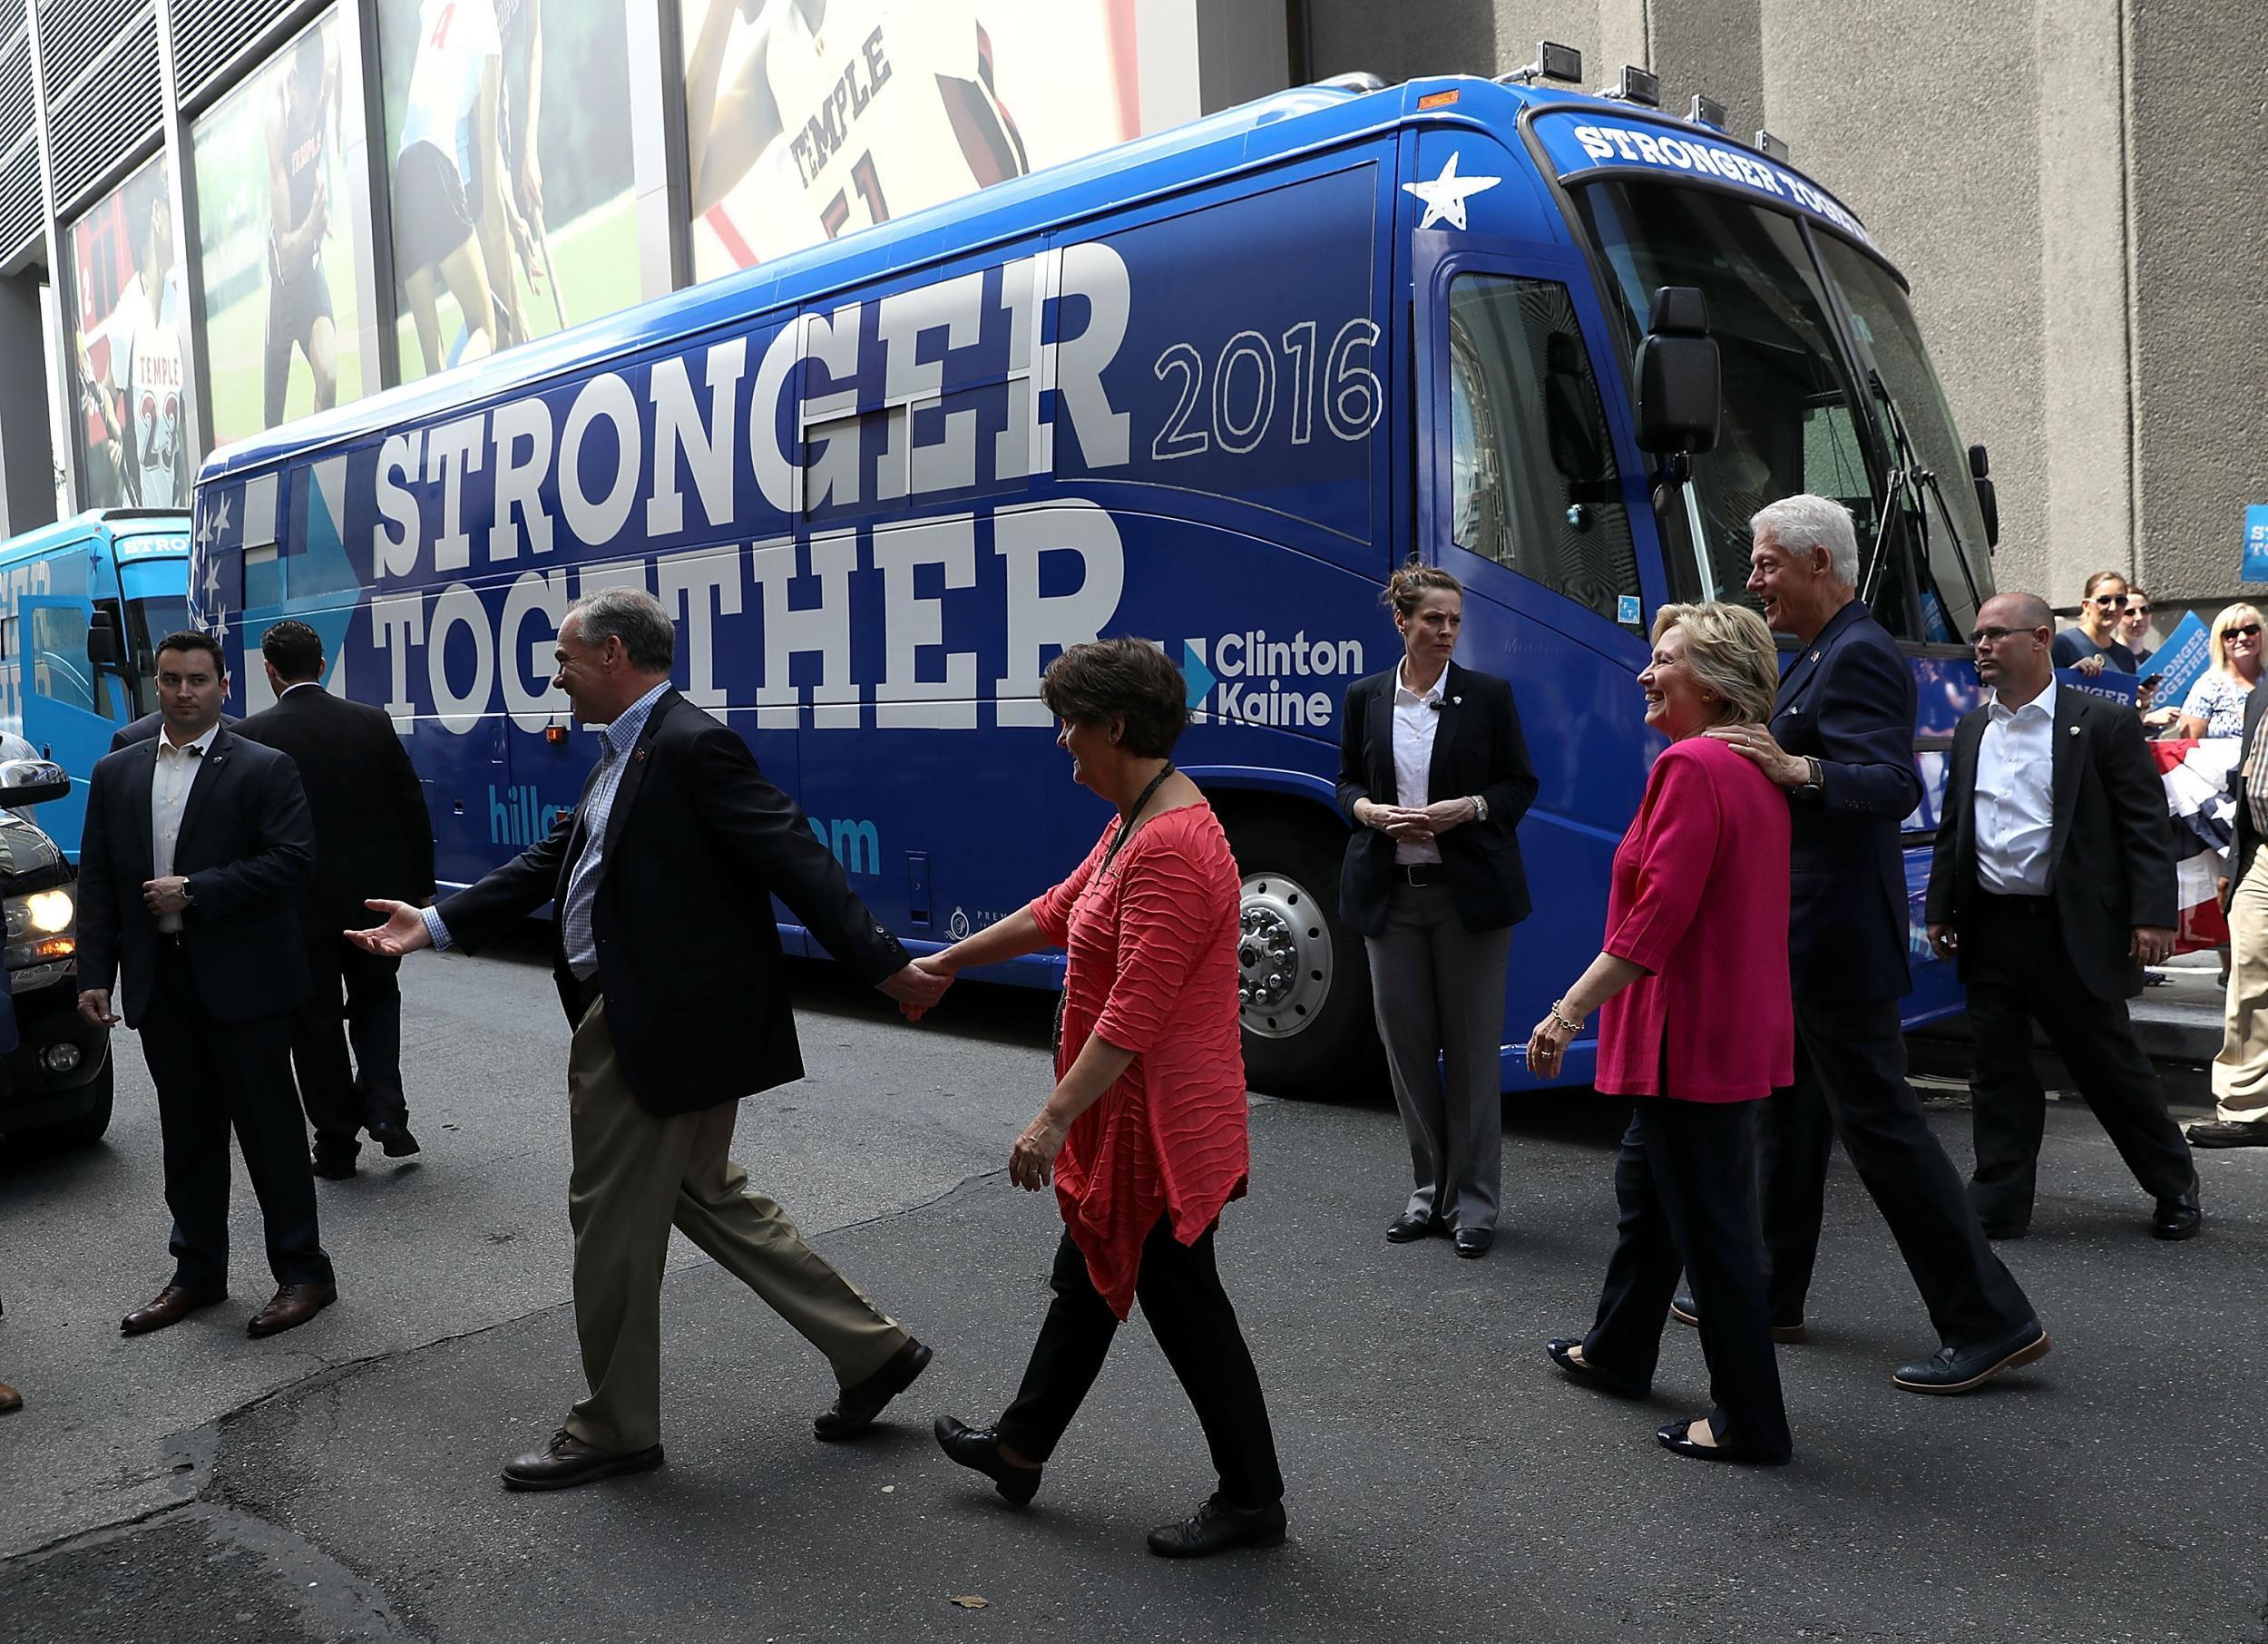 Clinton and Kaine, with their spouses, prepare to board a campaign bus out of Philadelphia